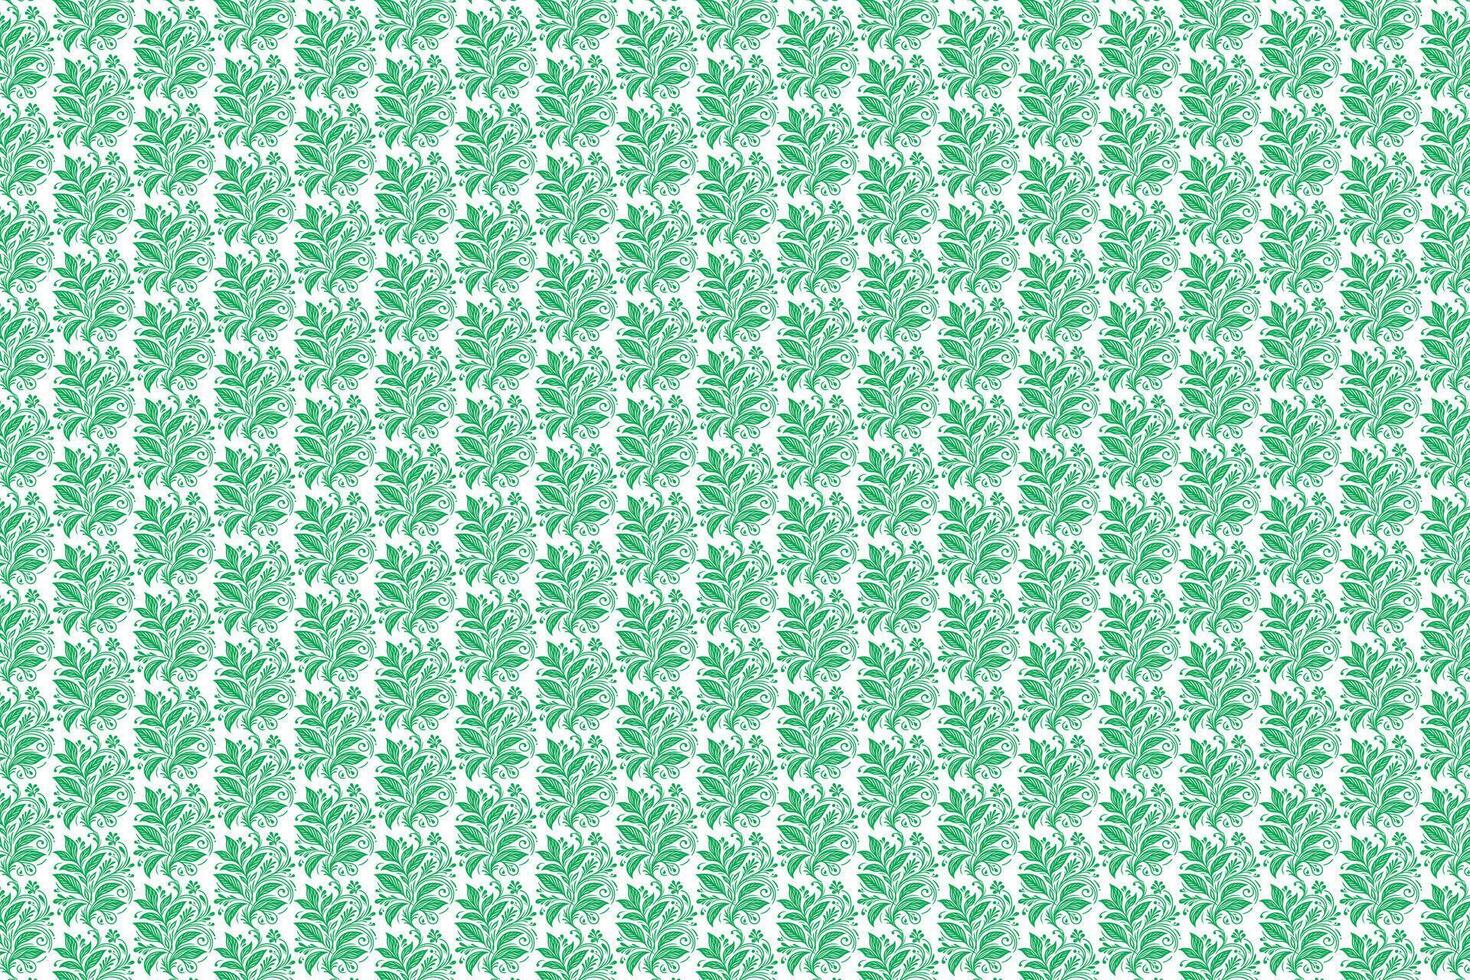 hand draw floral flower seamless pattern of green Floral leaves Spring Square style Vector Design on a white background, Curtain, carpet, wallpaper, clothing, wrapping